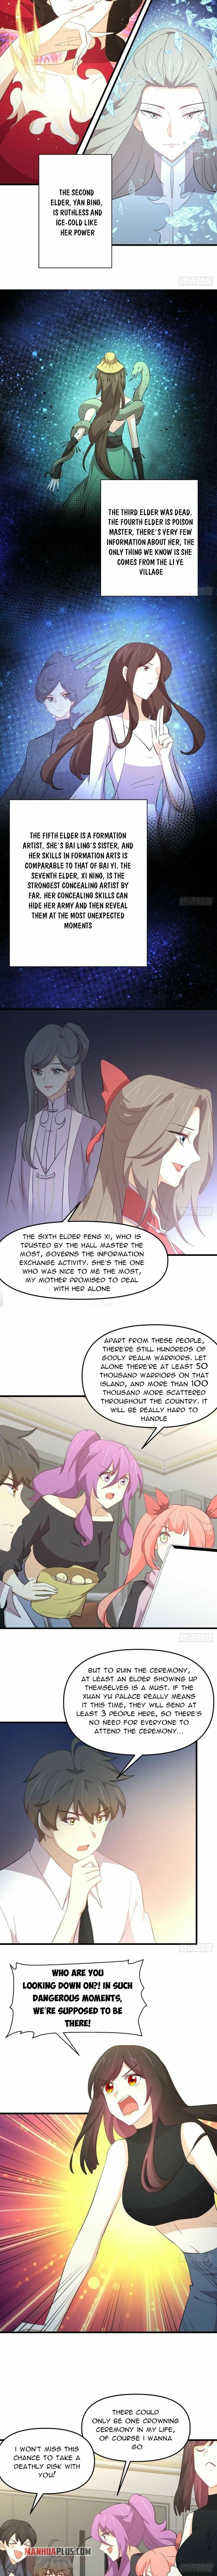 Immortal Swordsman In The Reverse World - Page 3